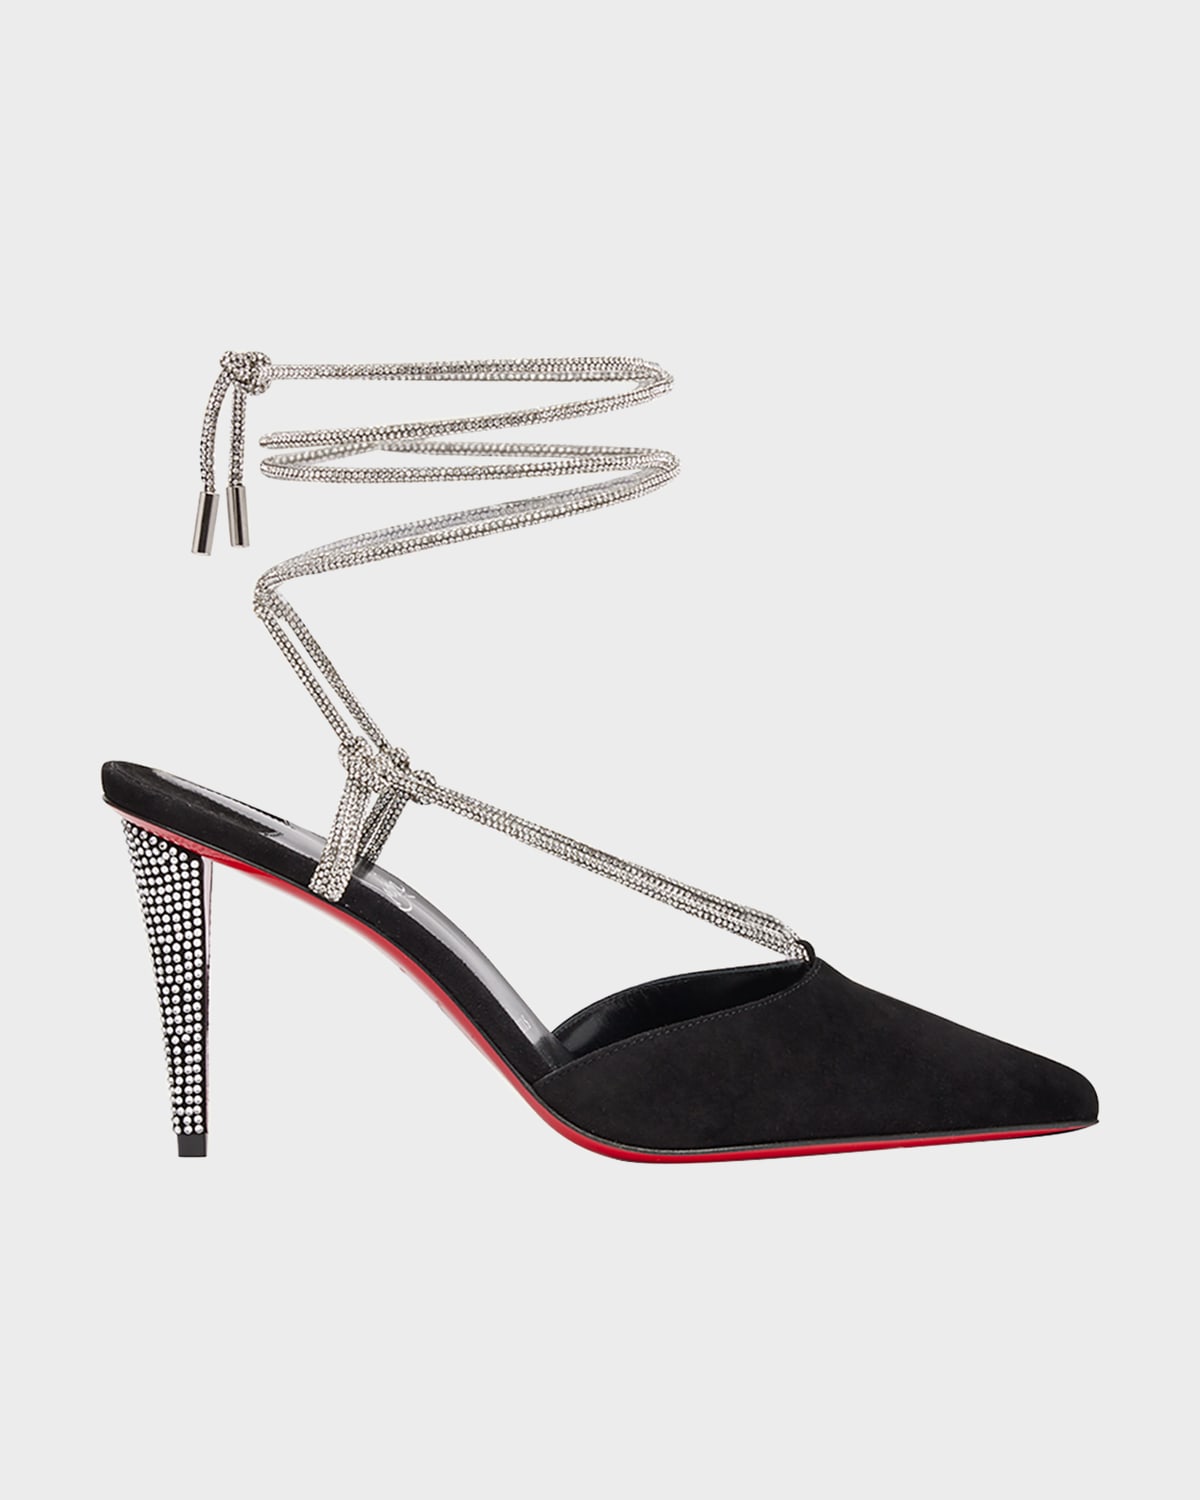 CHRISTIAN LOUBOUTIN ASTRID SUEDE ANKLE-WRAP RED SOLE PUMPS